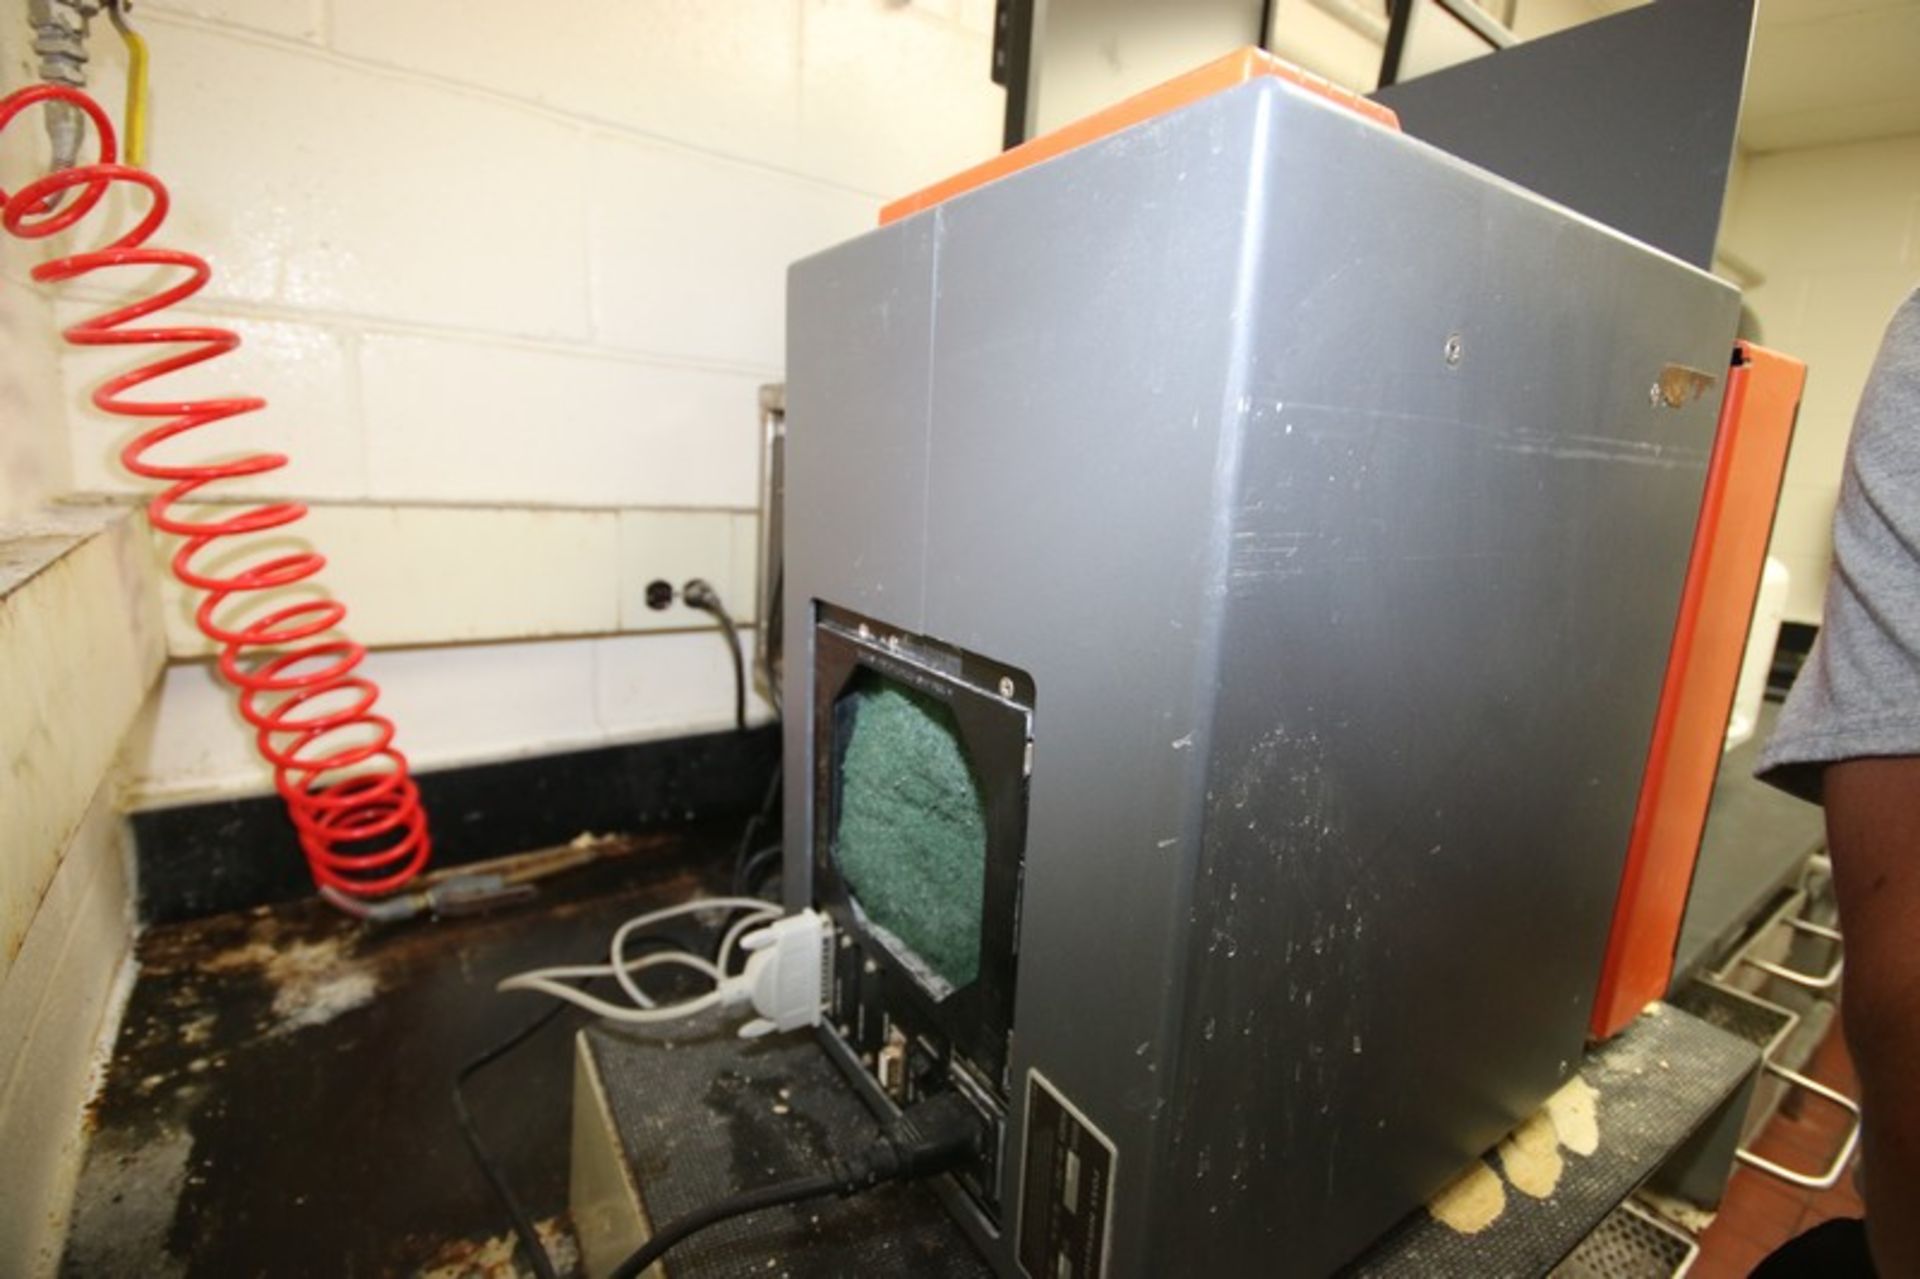 Foss NIRSystems Analyzer, M/N 6500-M, S/N 6545, 100-240 Volts (INV#82385)(LOCATED @ MDG AUCTION - Image 7 of 9